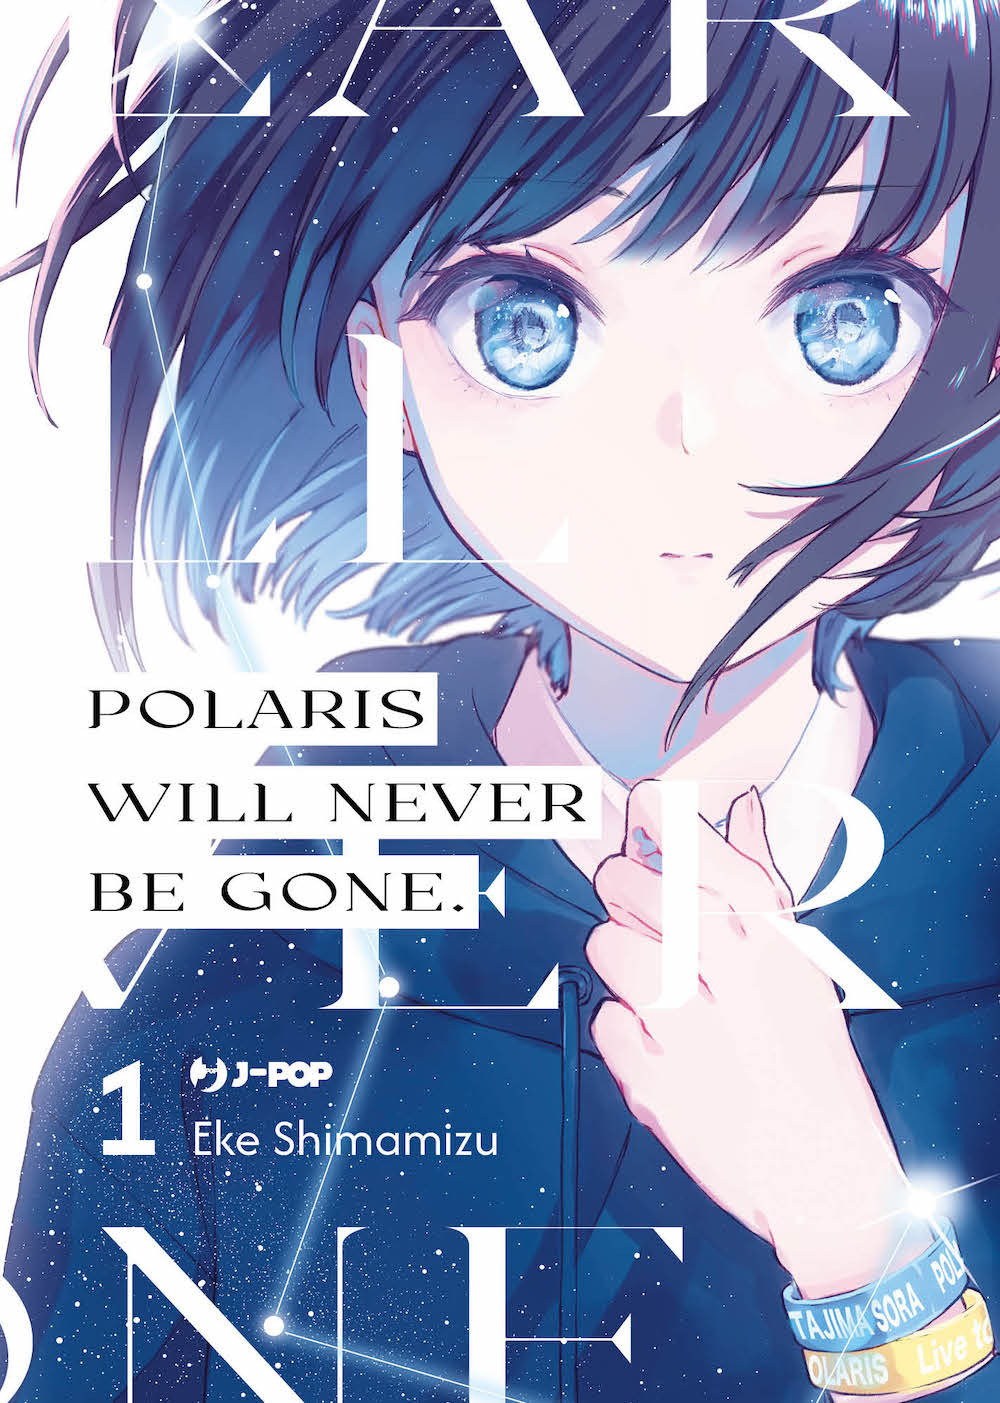 Polaris will never be gone. Vol. 1